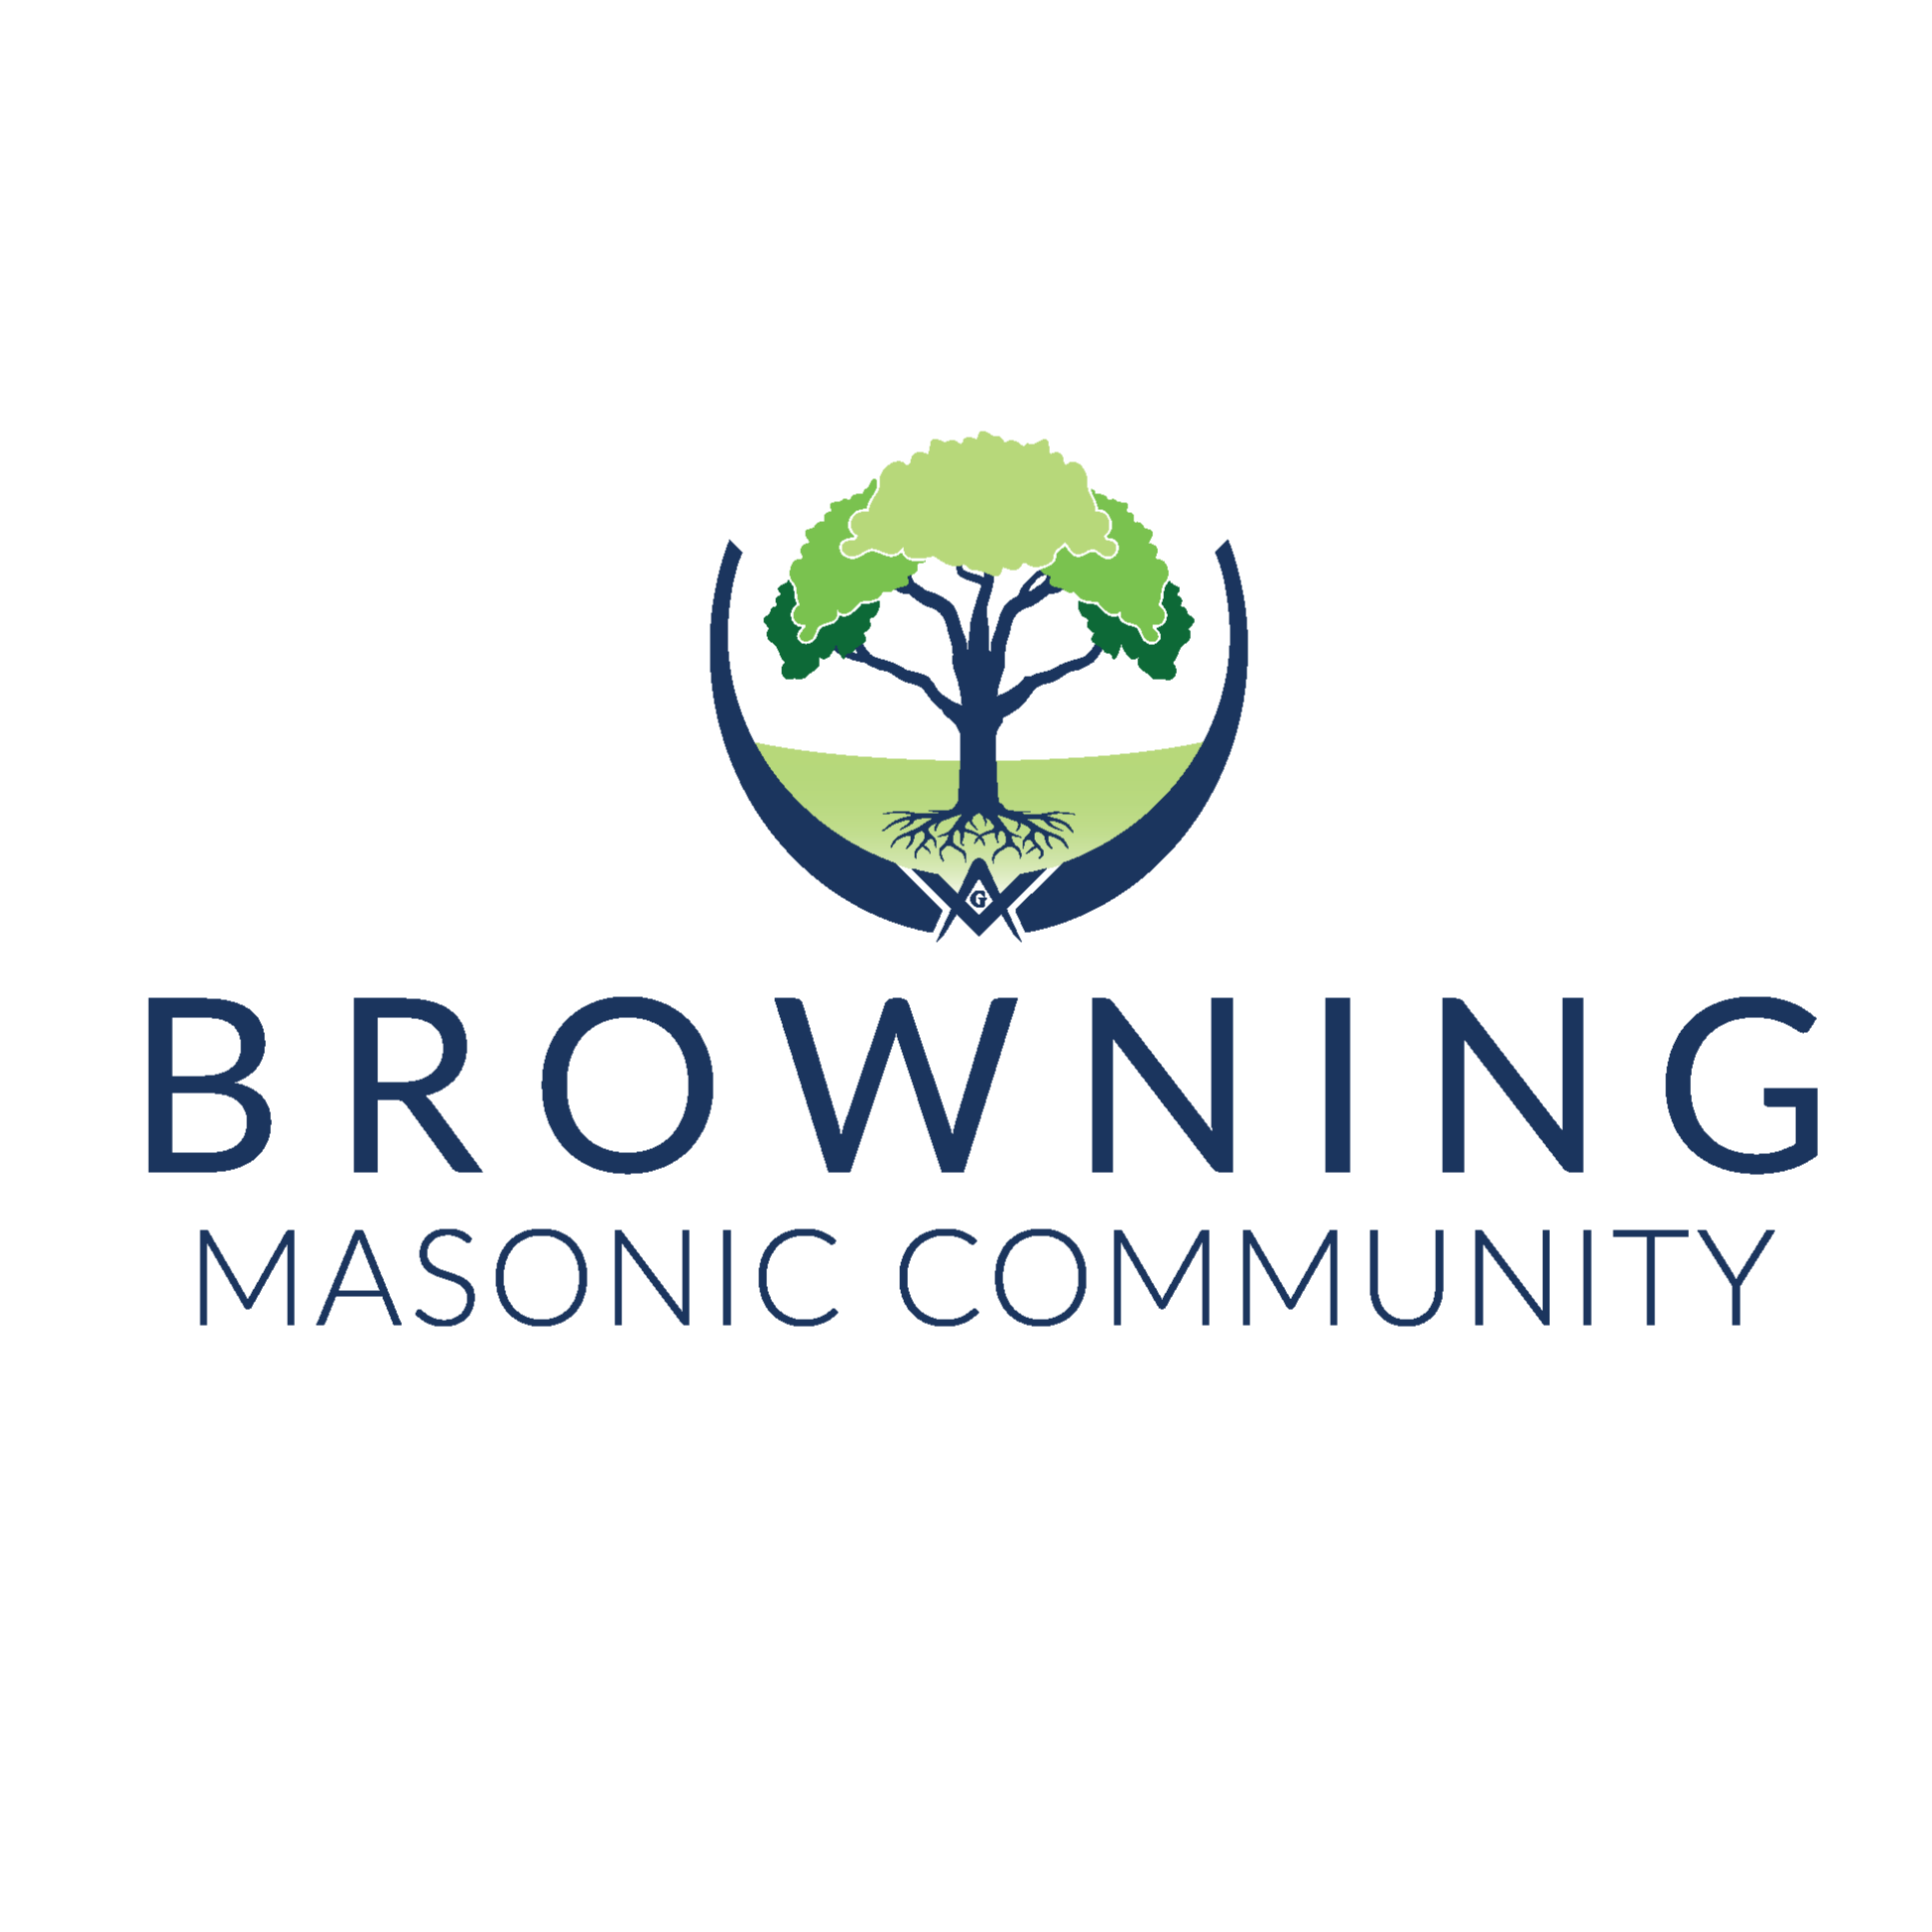 Browning Masonic Community - Waterville, OH 43566 - (419)878-4055 | ShowMeLocal.com